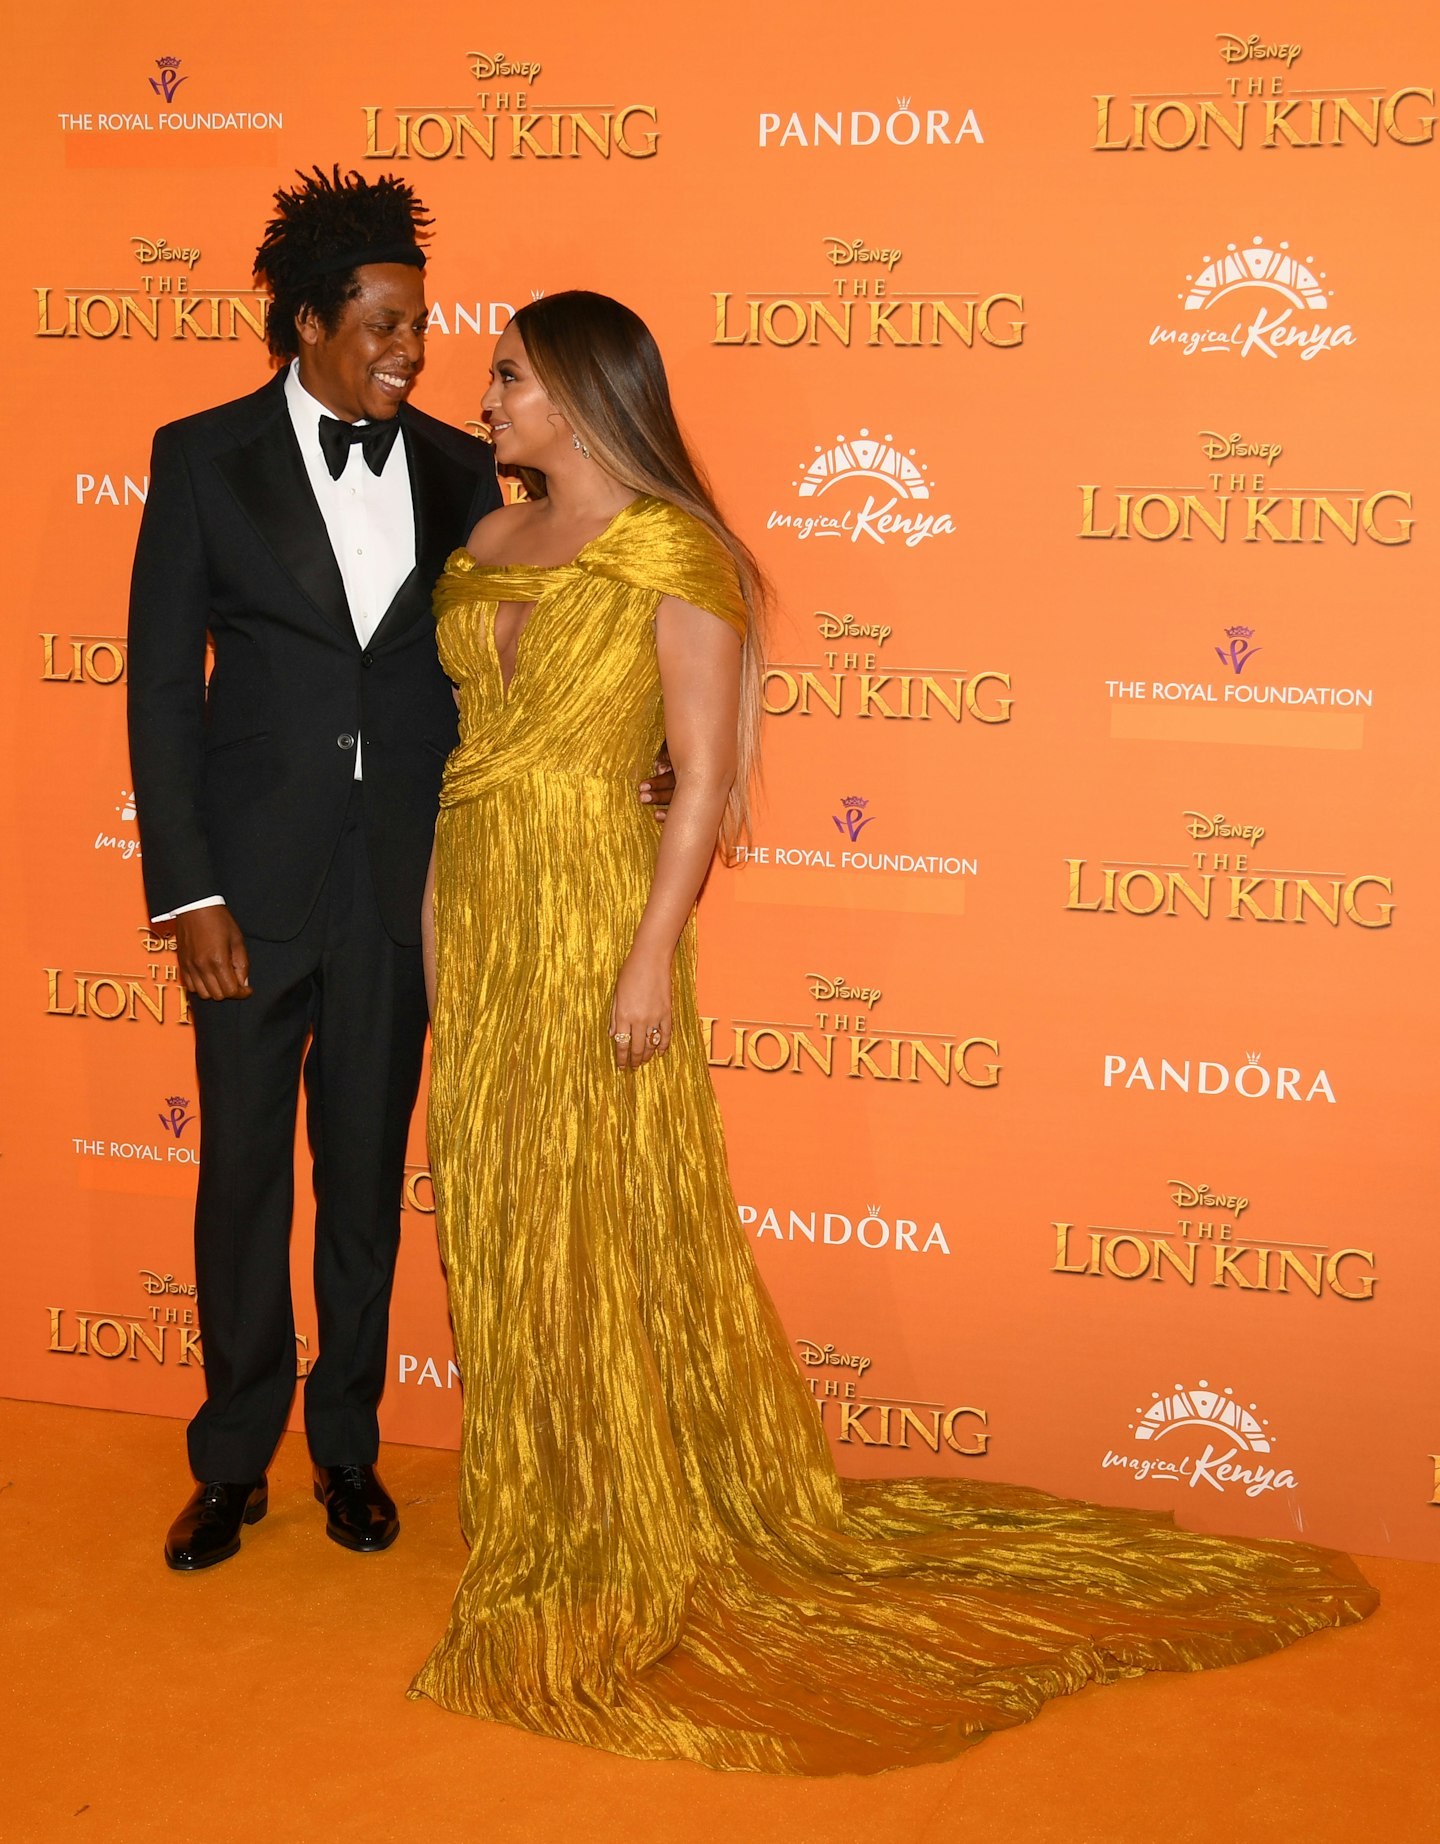 Beyoncu00e9 and Jay-Z attend the European Premiere of Disney's "The Lion King" at Odeon Luxe Leicester Square on July 14, 2019 in London, England